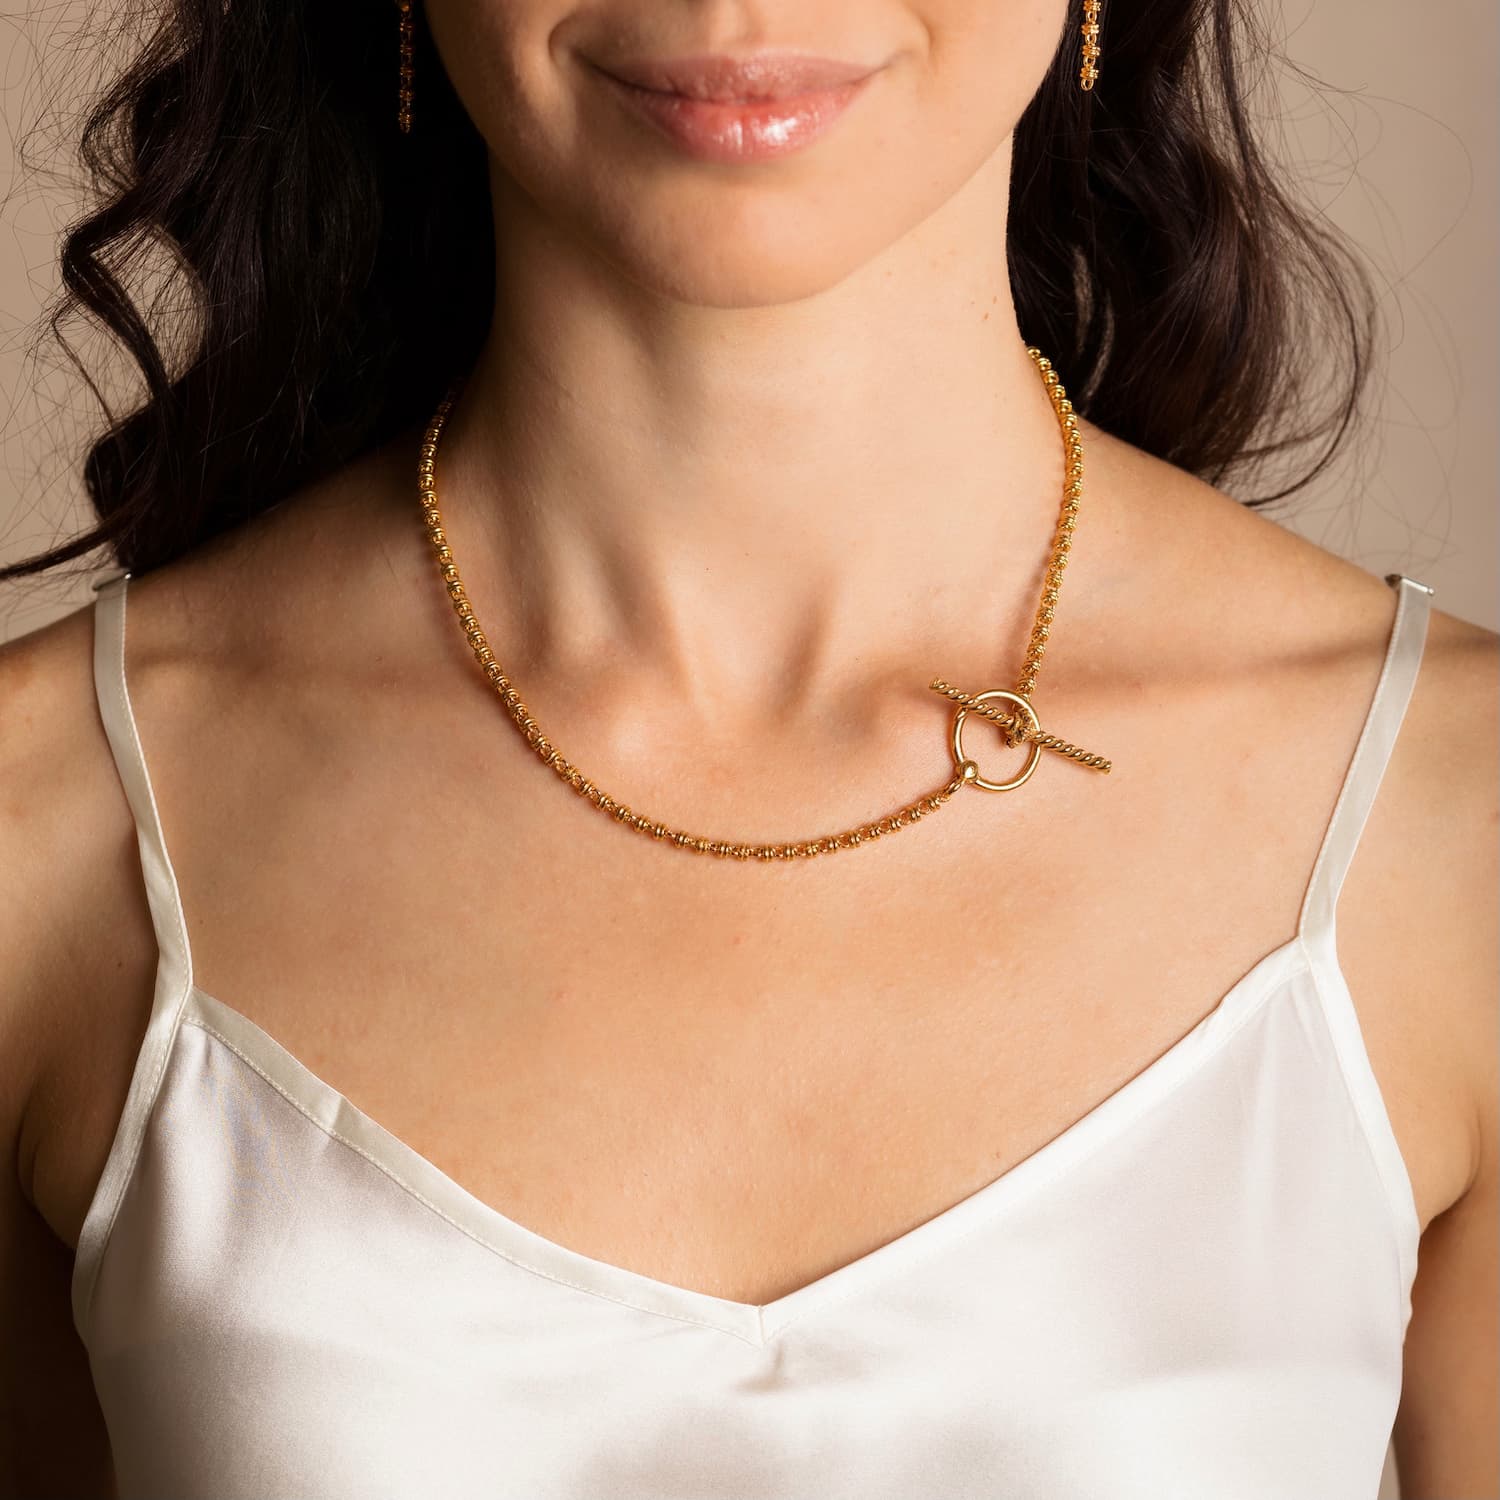 A model wearing a gold necklace with a toggle clasp and gold earrings to match the gold chain in the necklace design - both are from the Links 3mm collection from DelBrenna Italian Jewelry designers and artisans. Hand-crafted in Tuscany.